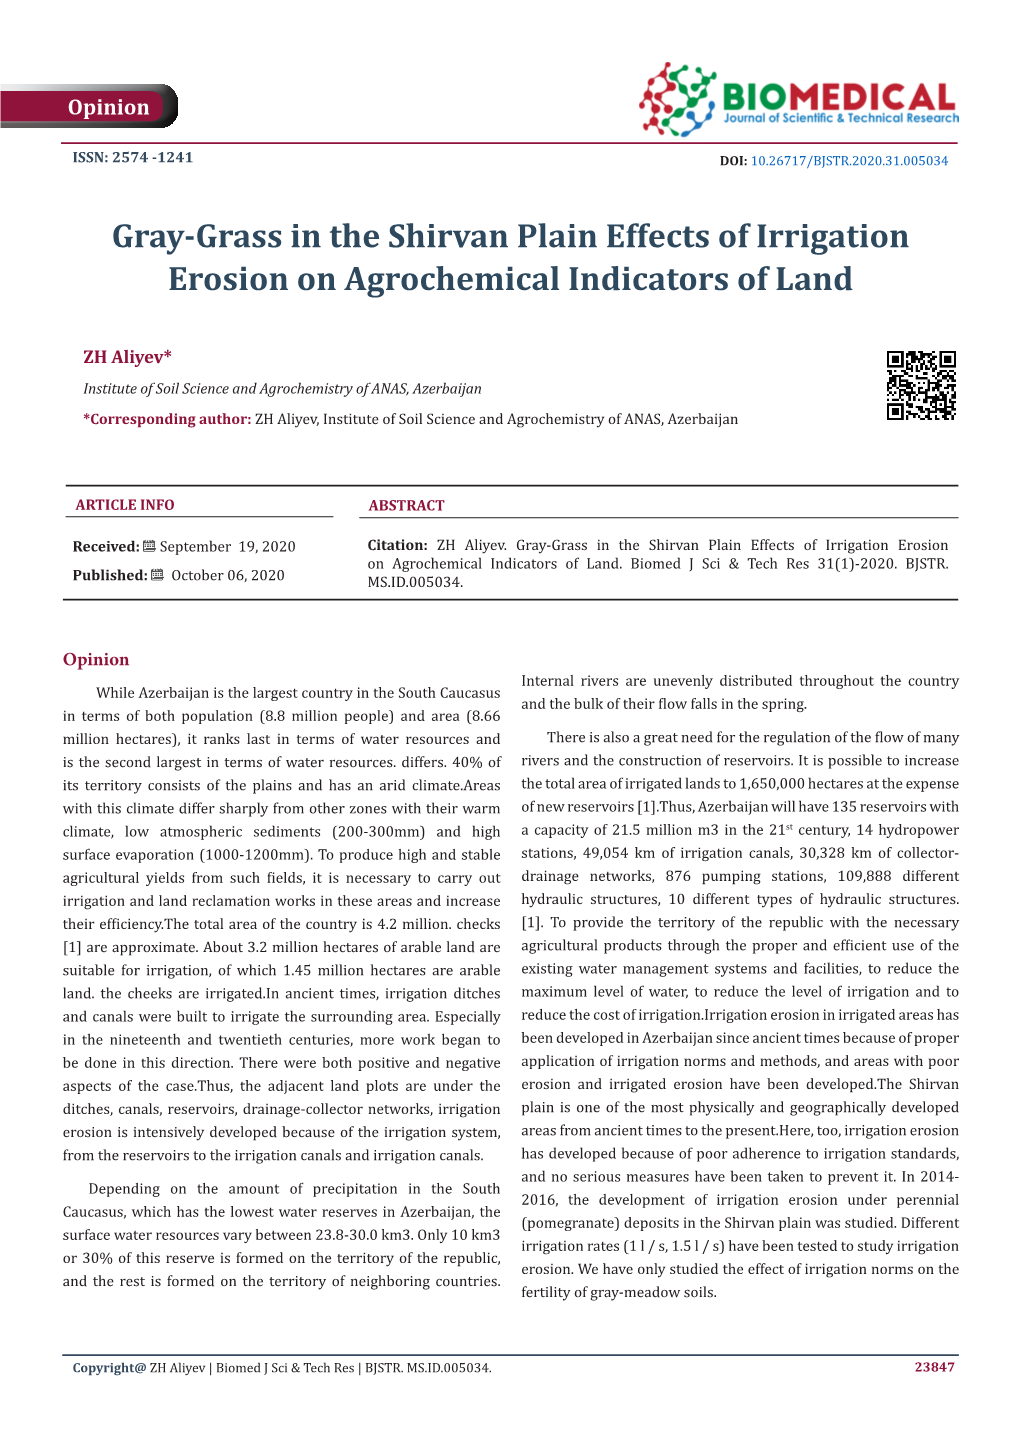 Gray-Grass in the Shirvan Plain Effects of Irrigation Erosion on Agrochemical Indicators of Land